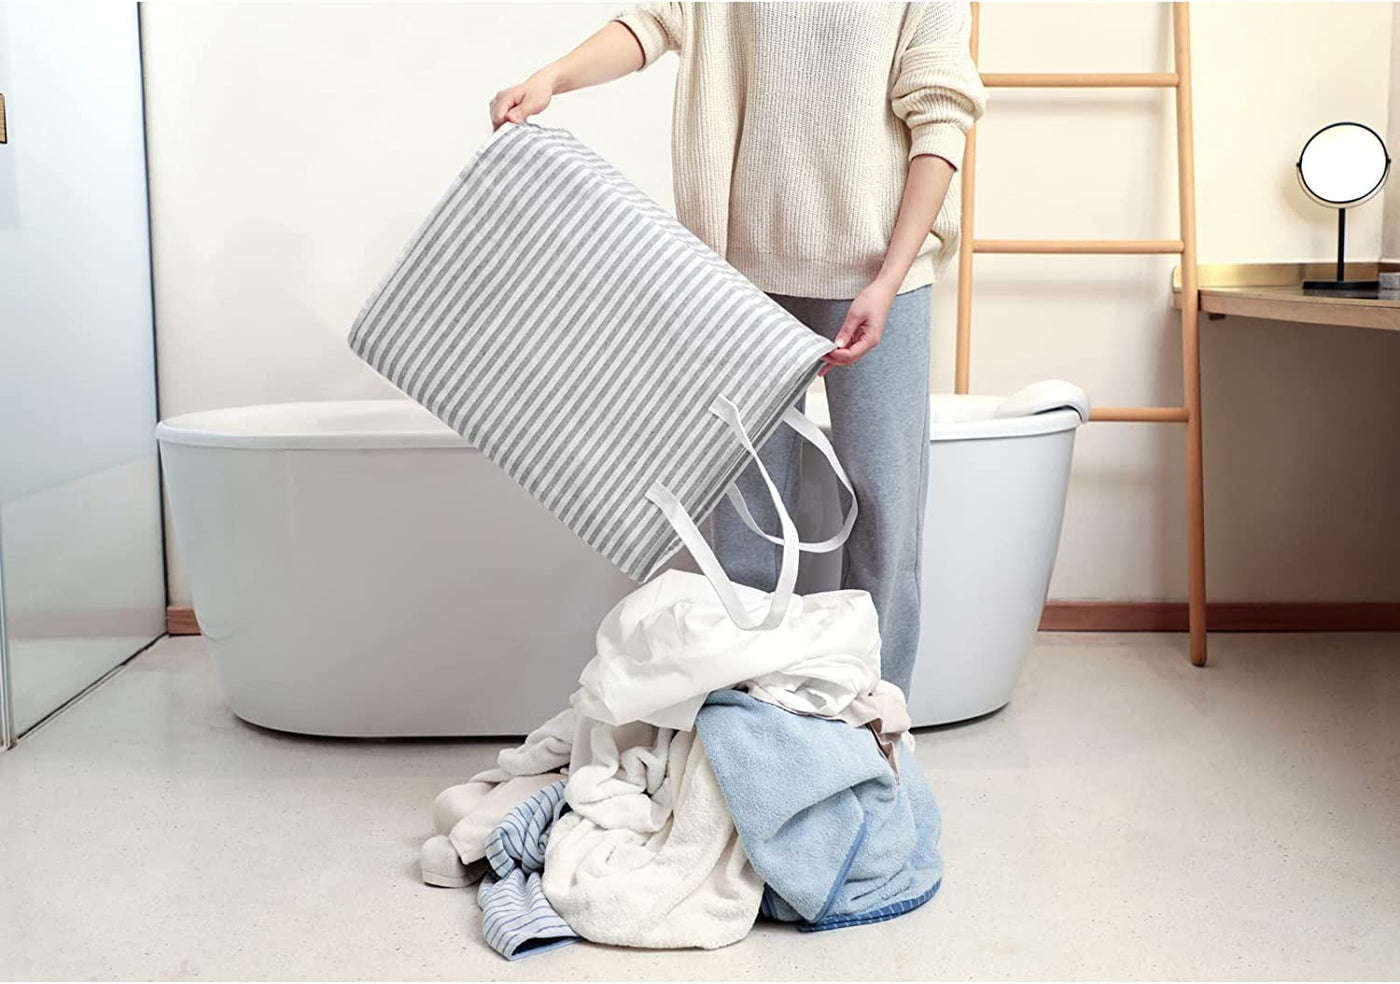 Waterproof Laundry Hamper Collapsible Baskets with Easy Carry Handles - White Grey Stripe